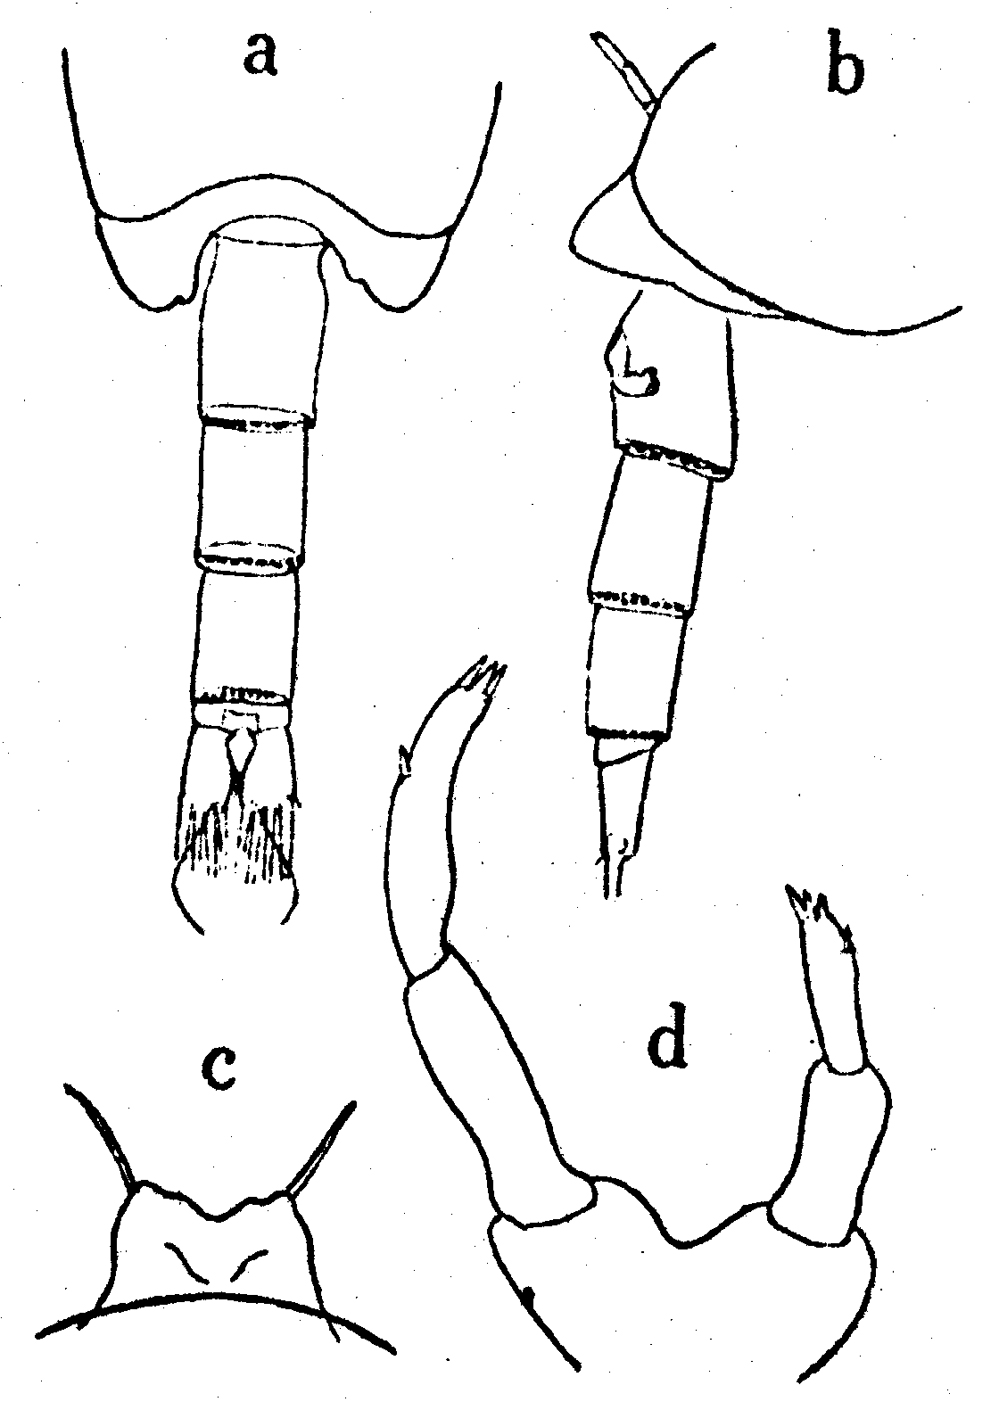 Species Undinella frontalis - Plate 2 of morphological figures